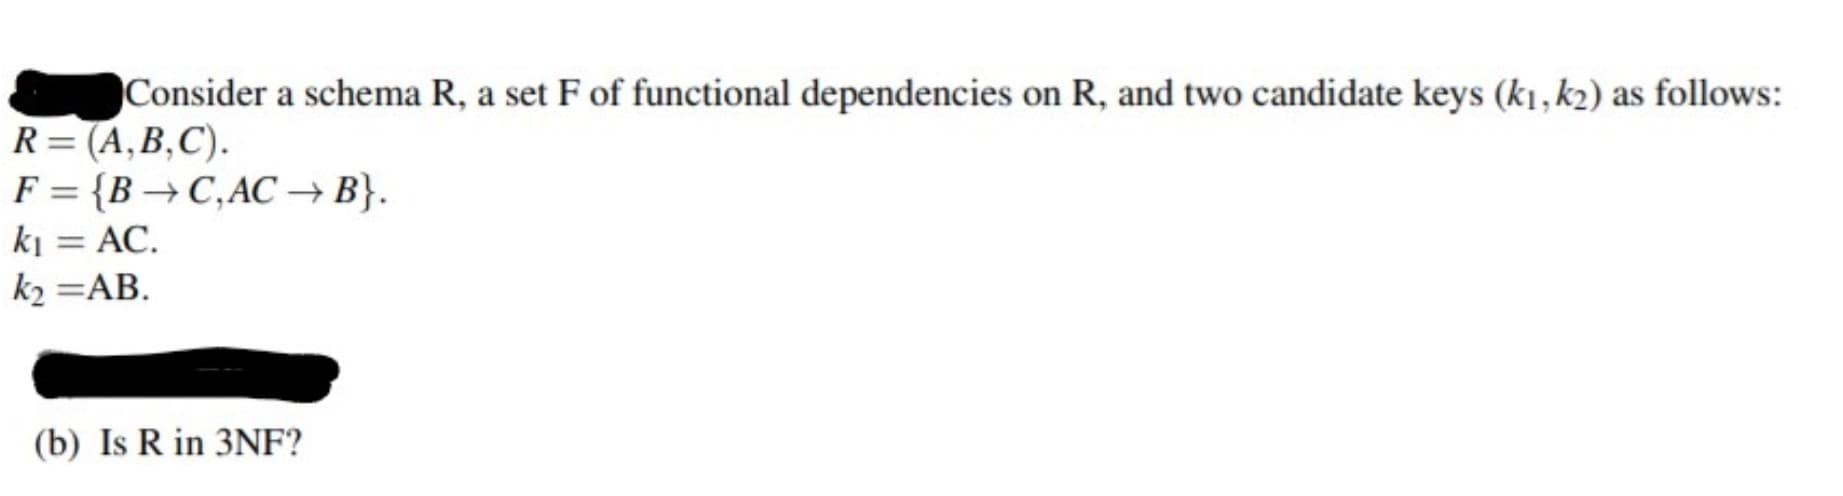 Consider a schema R, a set F of functional dependencies on R, and two candidate keys (k1, k2) as follows:
R=(A,B,C).
F = {B → C,AC → B}.
ki = AC.
%3D
k2 =AB.
(b) Is R in 3NF?
